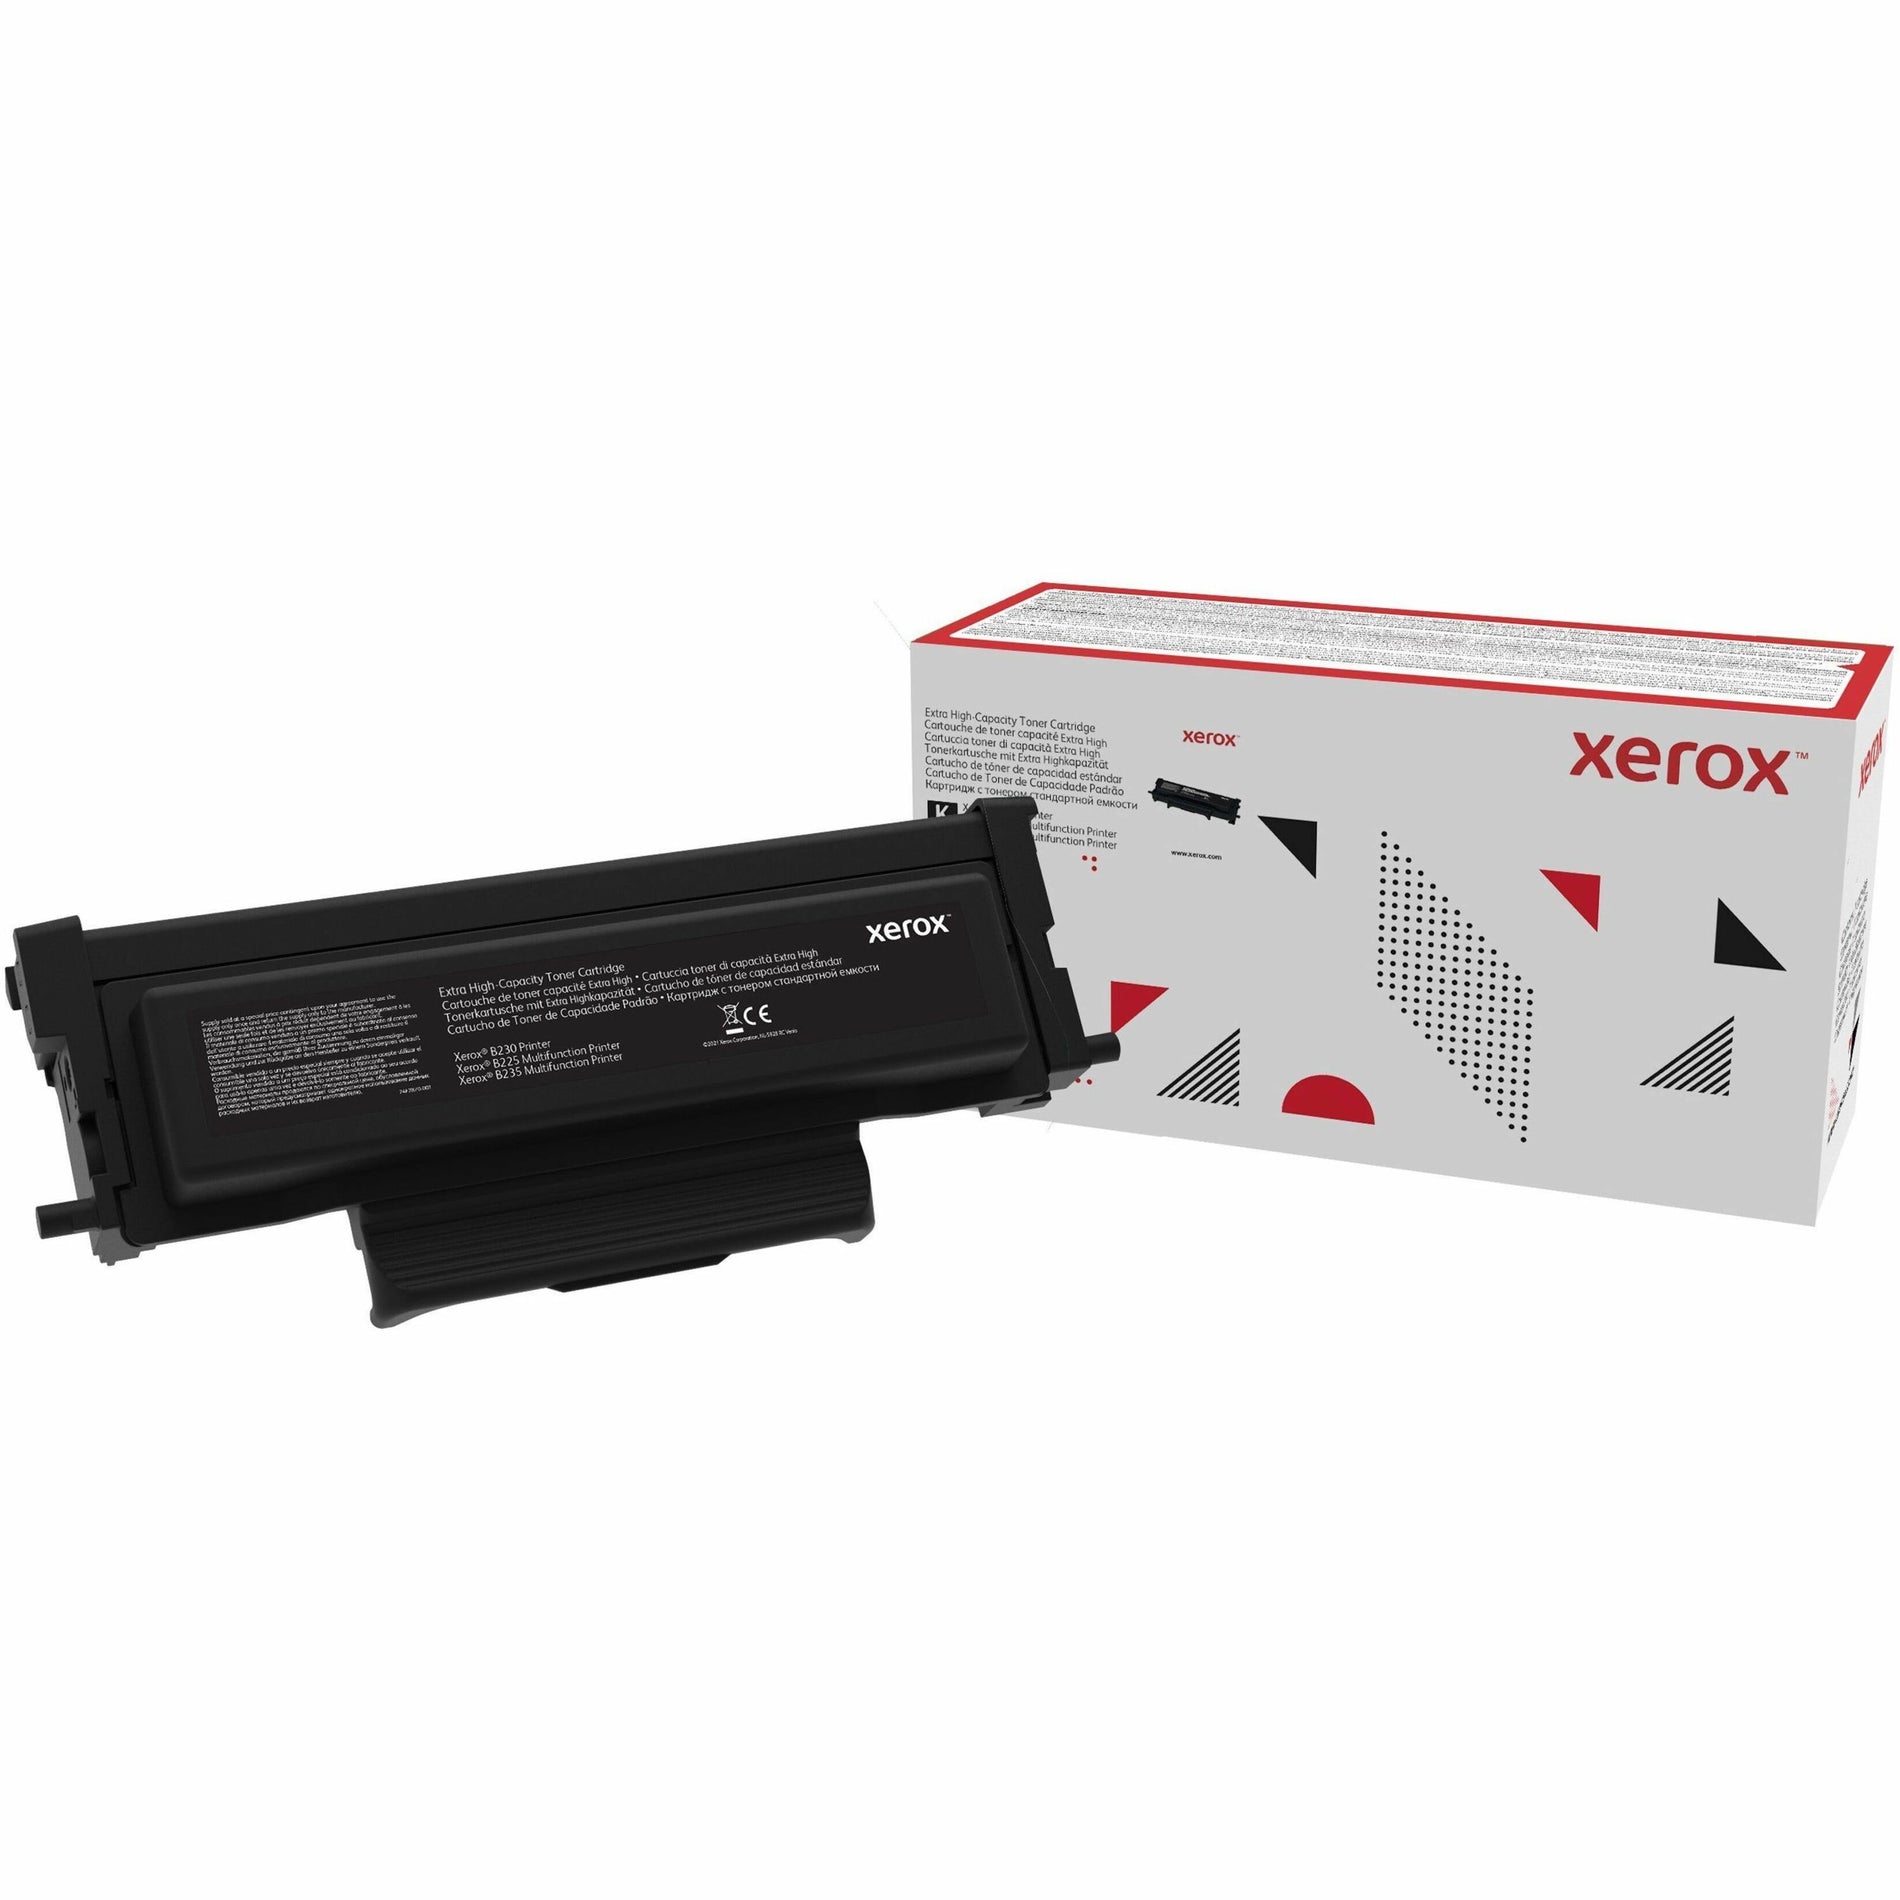 Xerox 006R04401 Toner Cartridge, Extra High Yield, Black - 6000 Pages